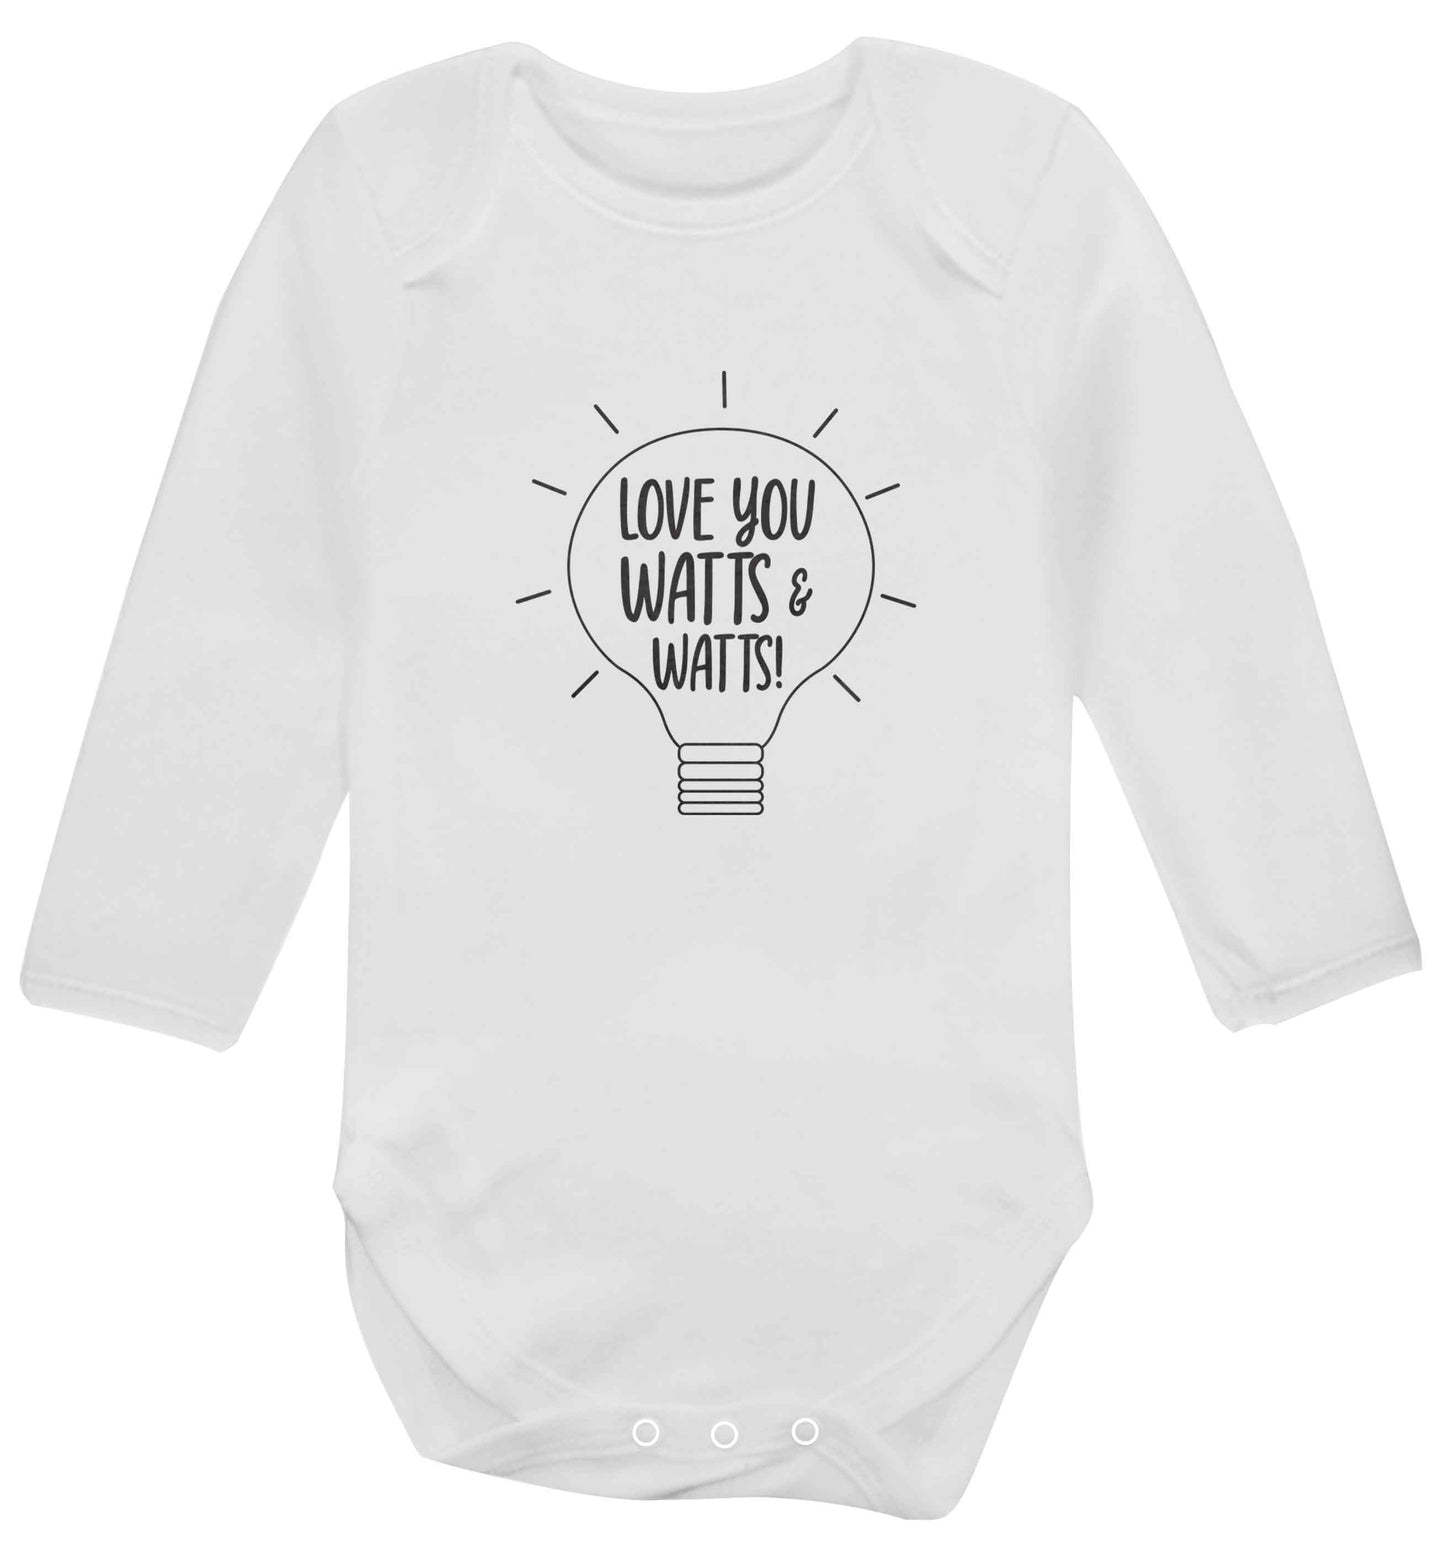 I love you watts and watts baby vest long sleeved white 6-12 months